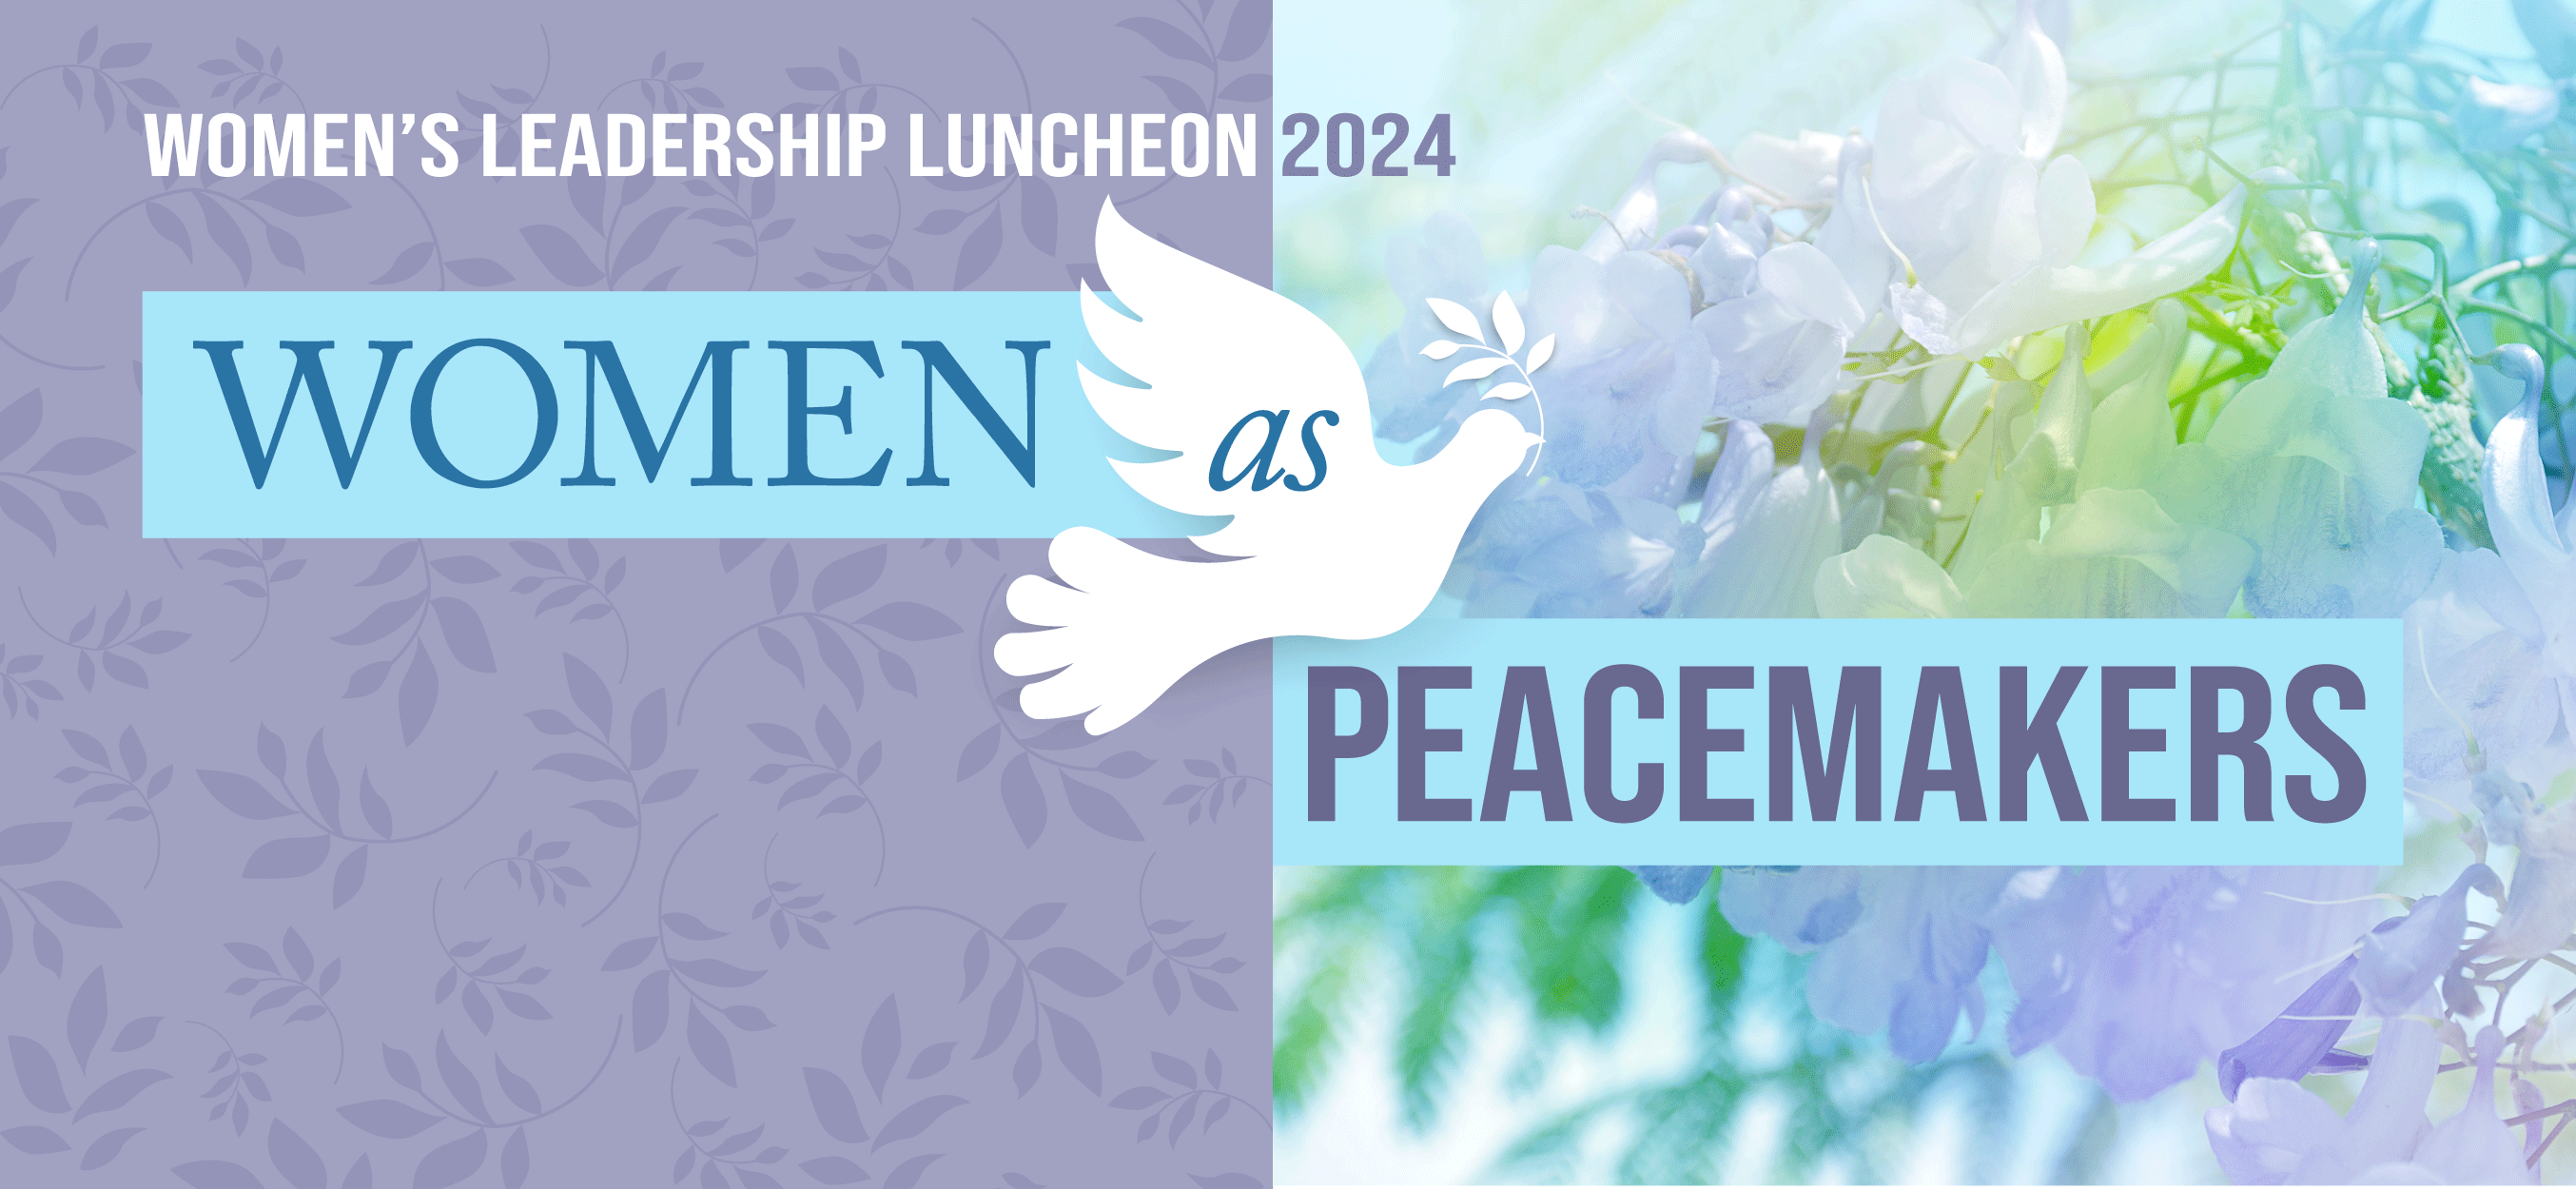 WLL 2024 Women's Leadership Luncheon web header, theme "Women as Peacemakers"